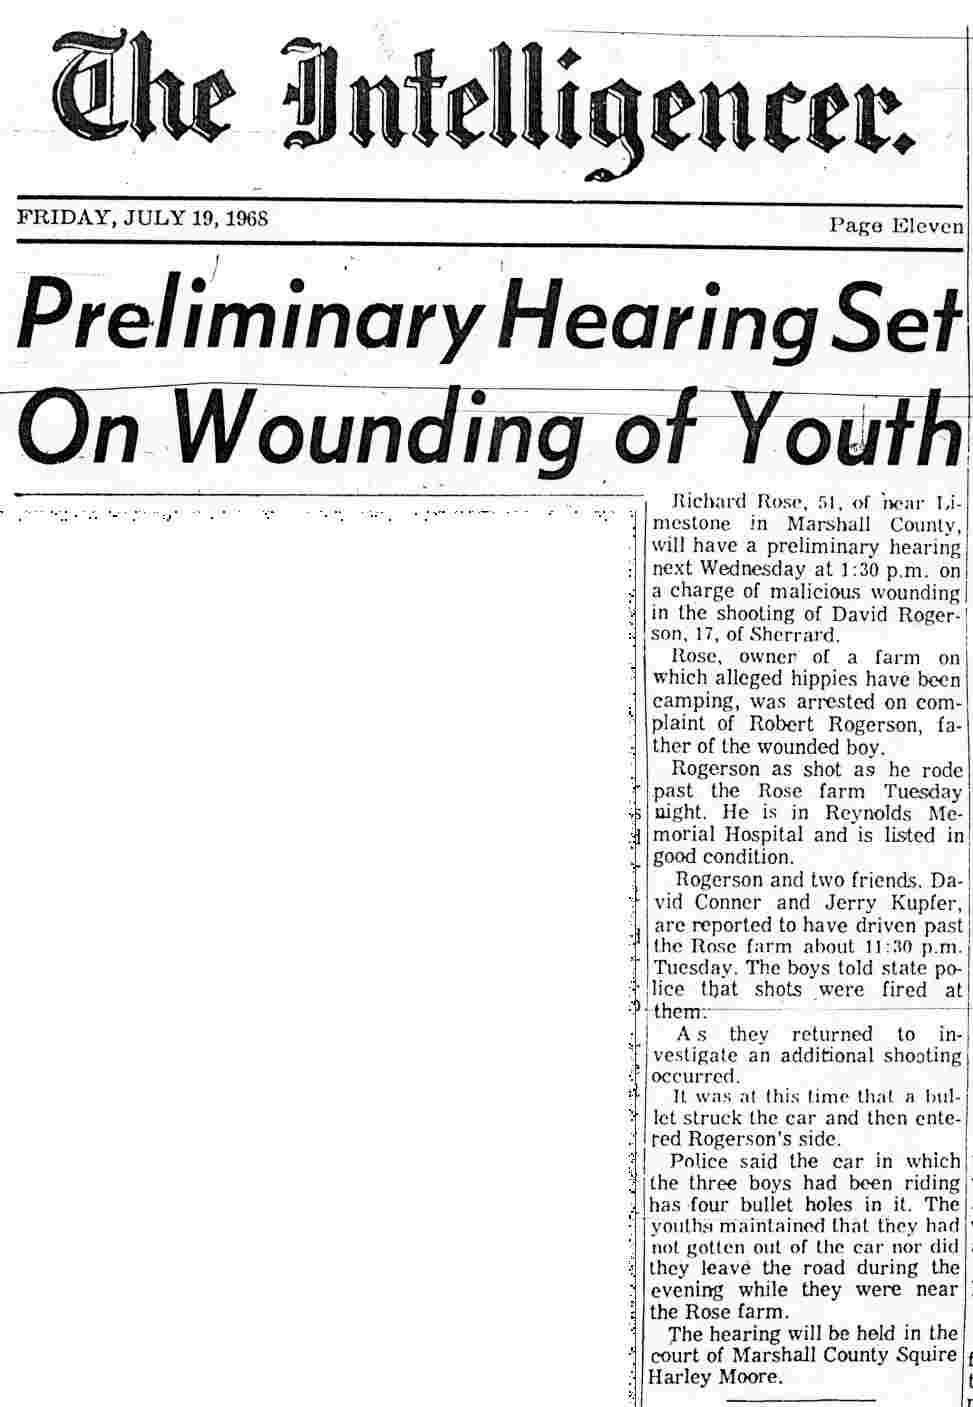 Preliminary Hearing Set On Wounding of Youth - The Wheeling Intelligencer - July 19, 1968